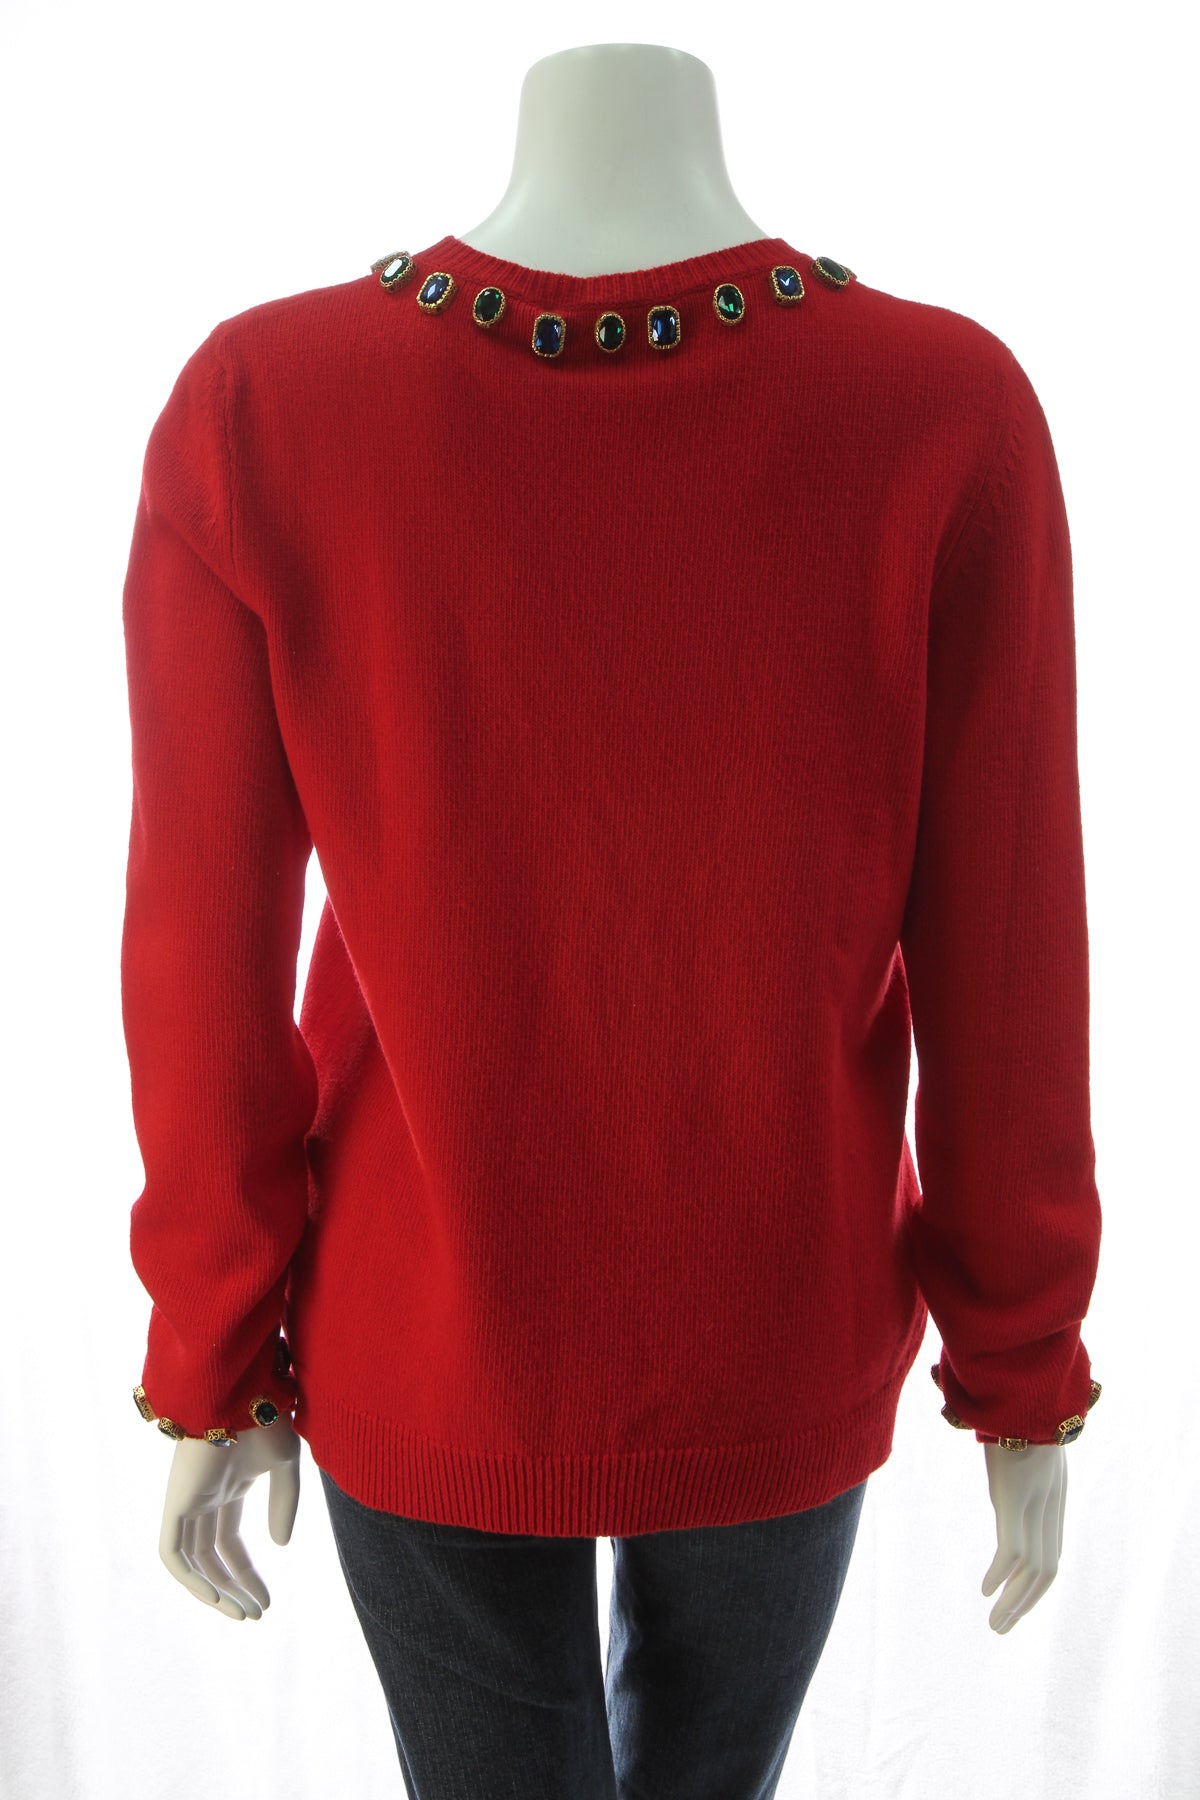 Wholesale Women's Knitwear Sweater Stone Embroidered Red - 30317